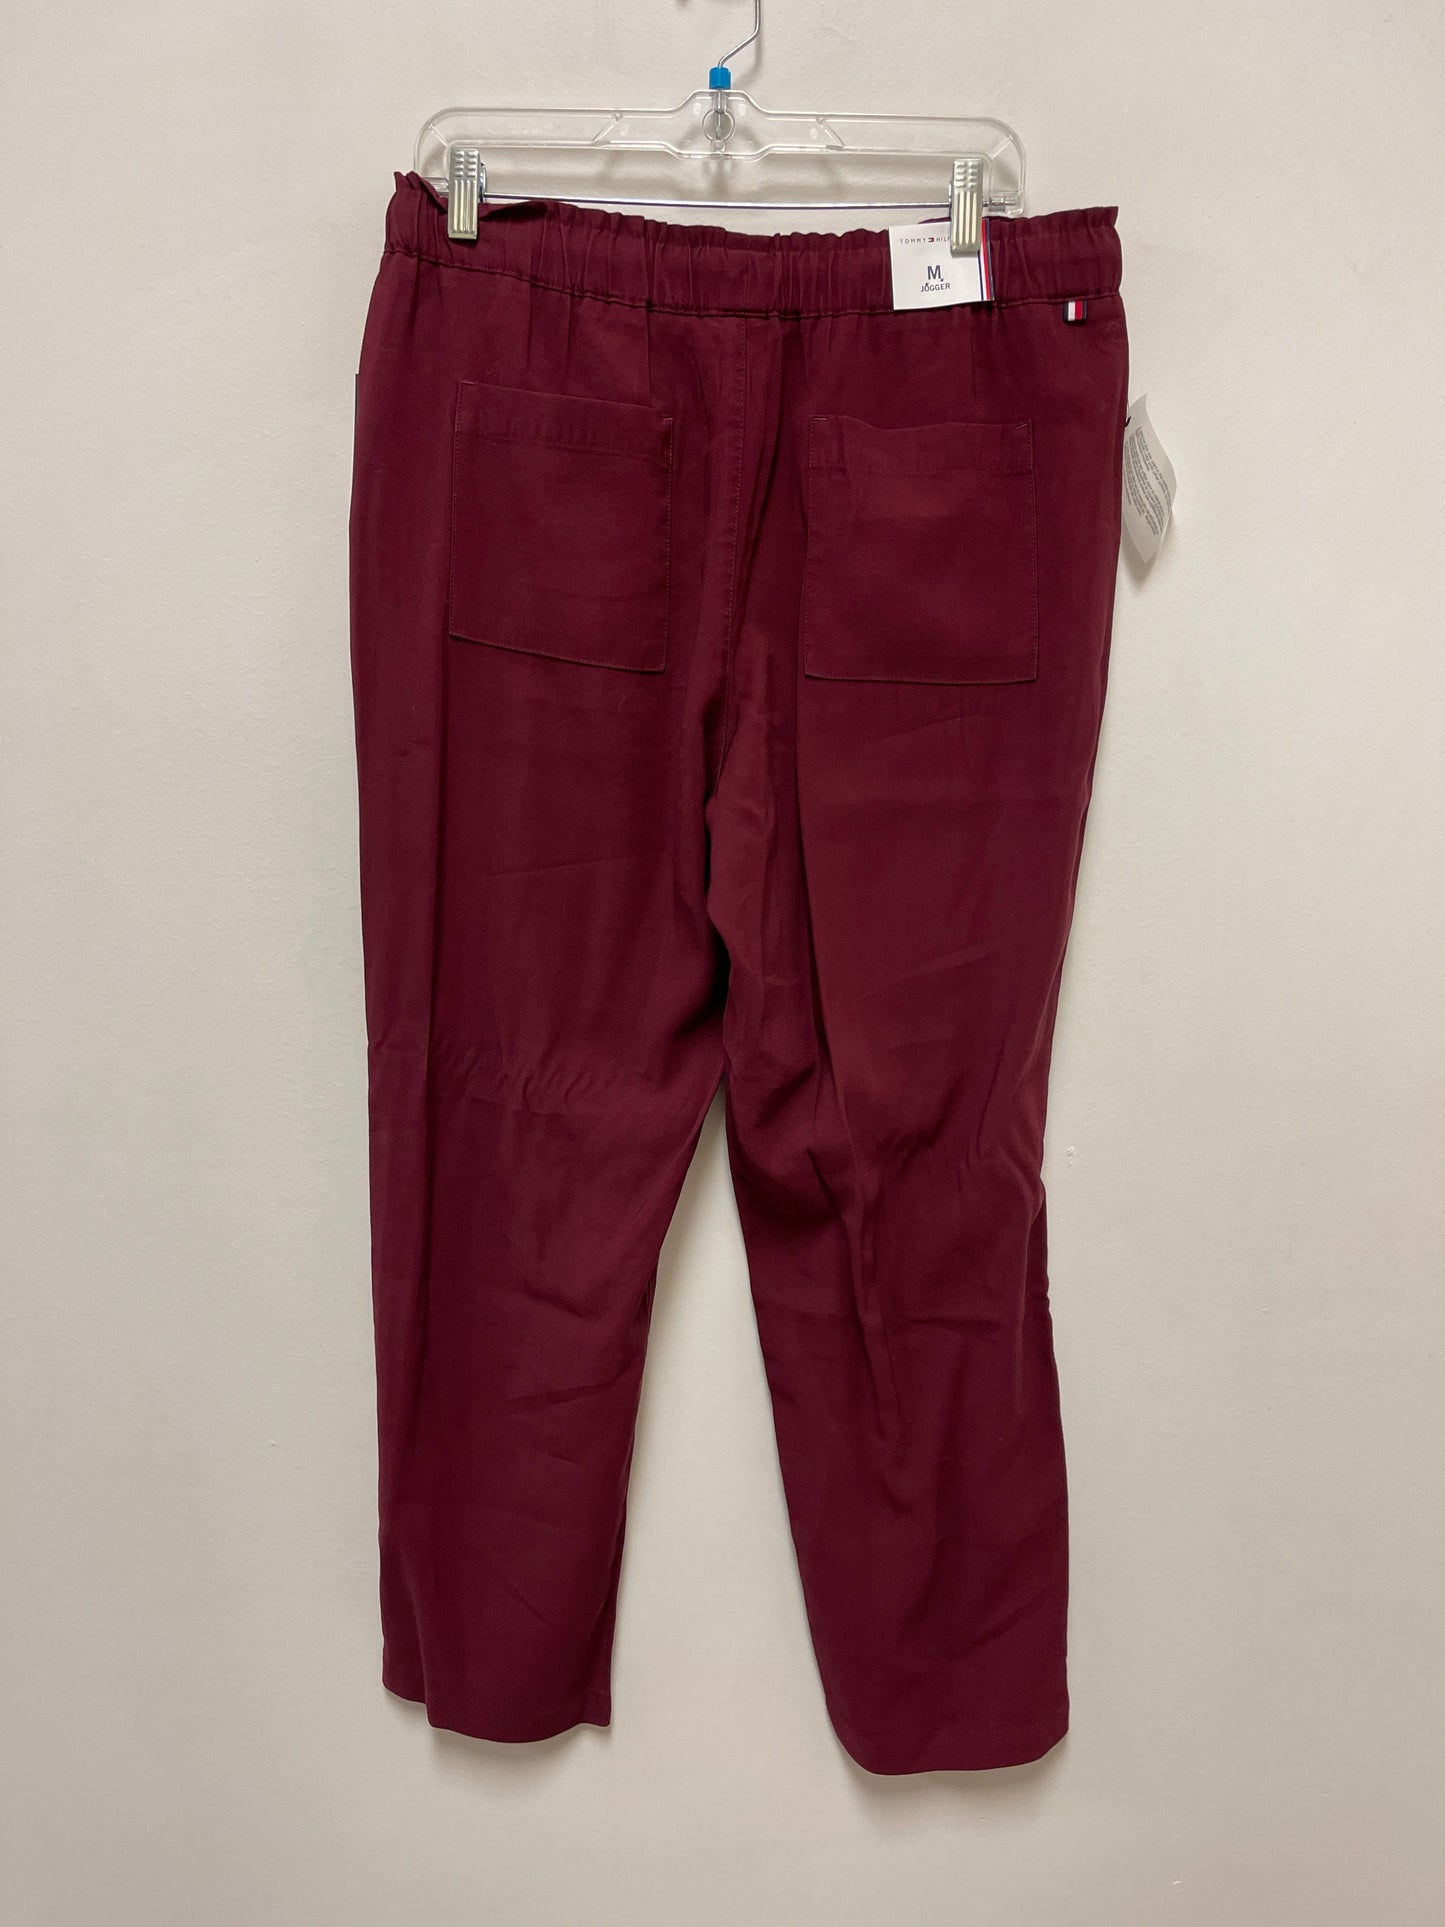 Red Pants Other Tommy Hilfiger, Size 8